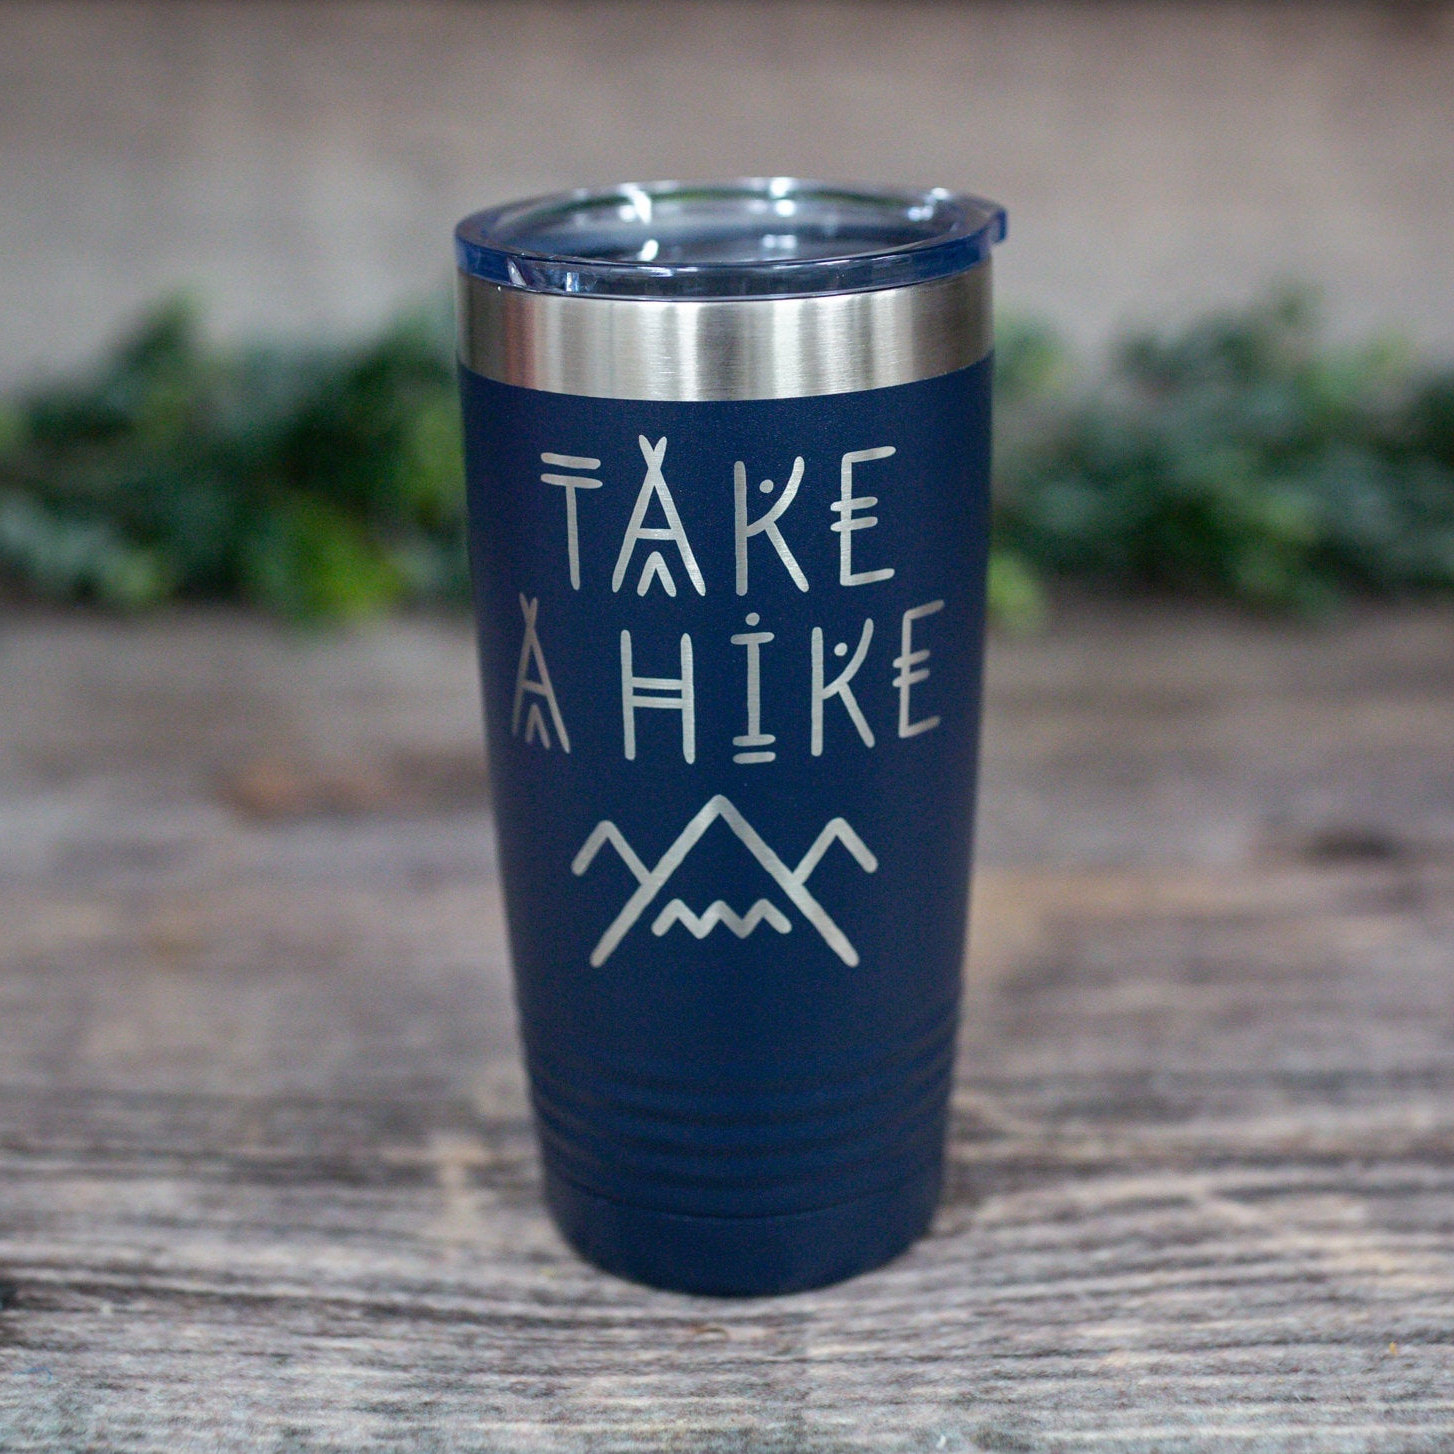 https://3cetching.com/wp-content/uploads/2021/07/take-a-hike-engraved-polar-camel-stainless-steel-tumbler-hiking-gift-mug-outdoorsy-gift-cup-60f78af0.jpg